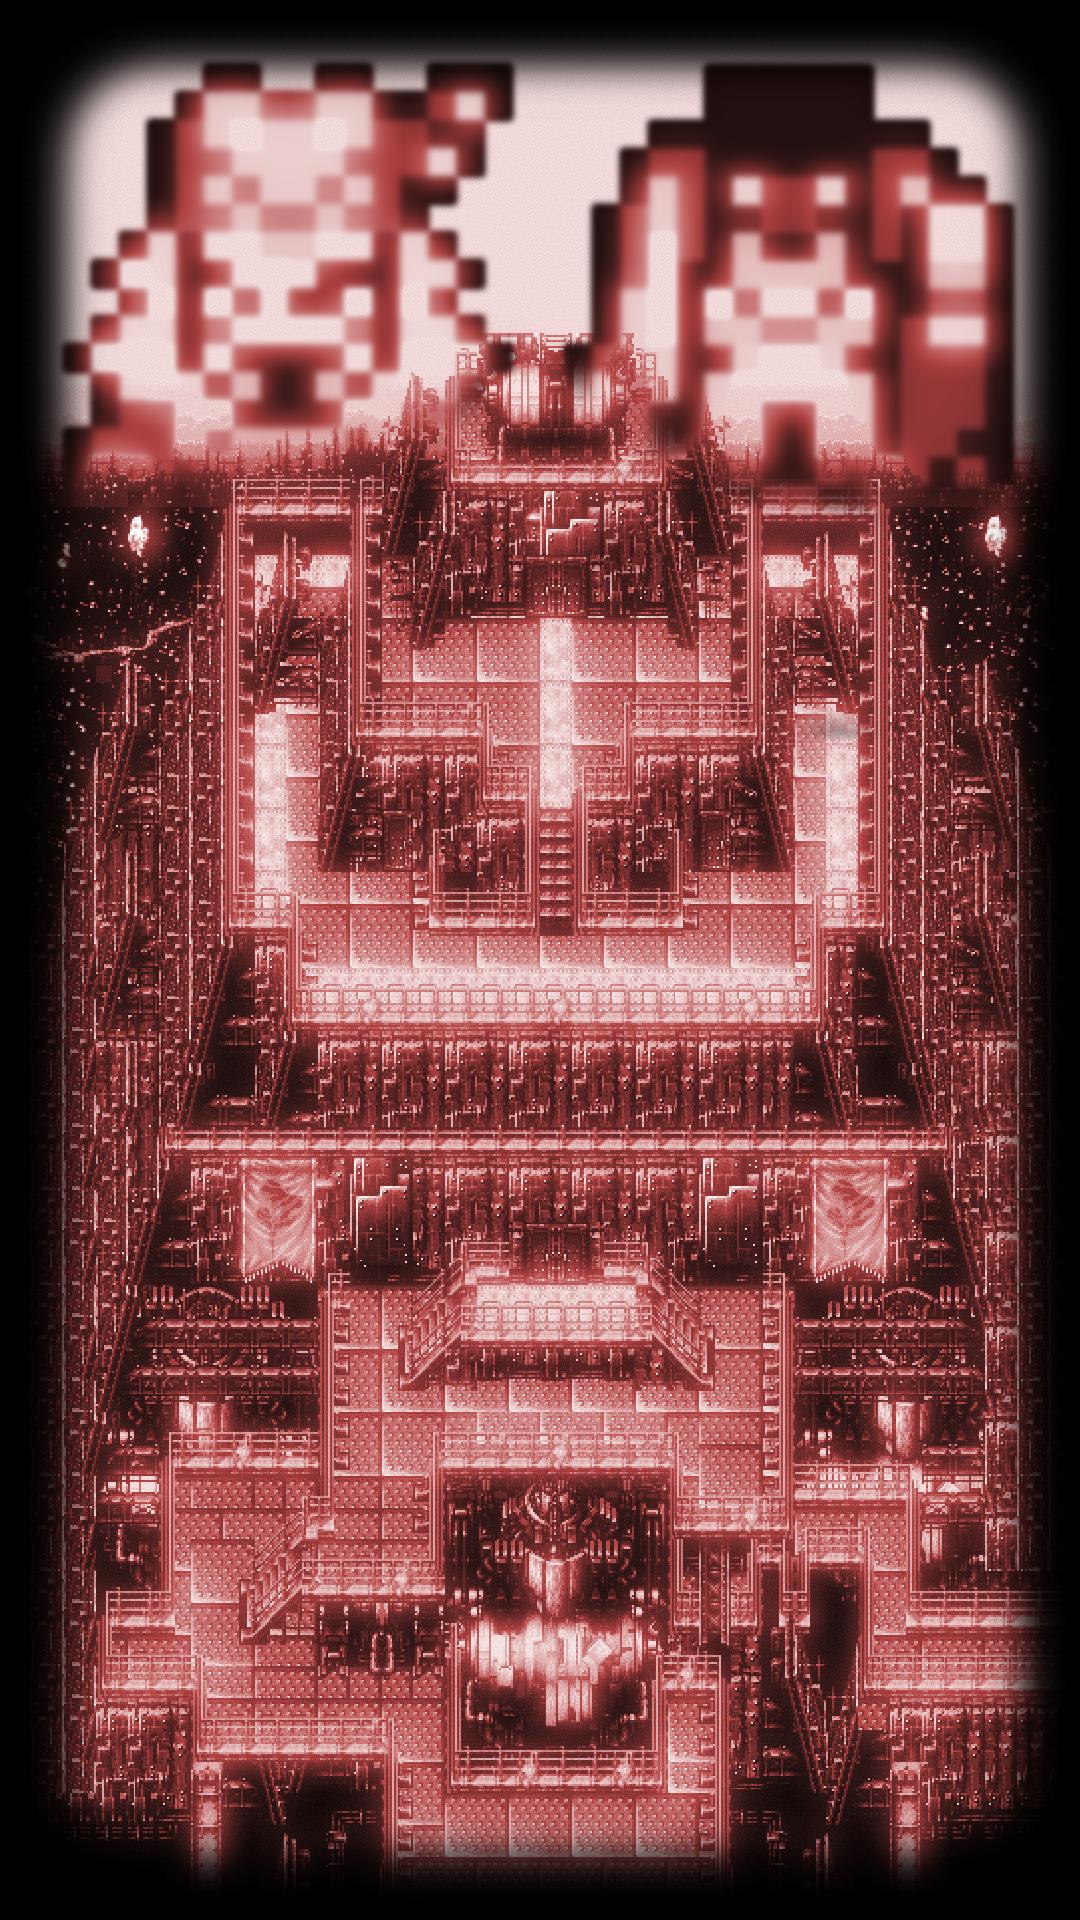 1080x1920 vertical wallpaper I made for my Galaxy S4 Finalfantasy6